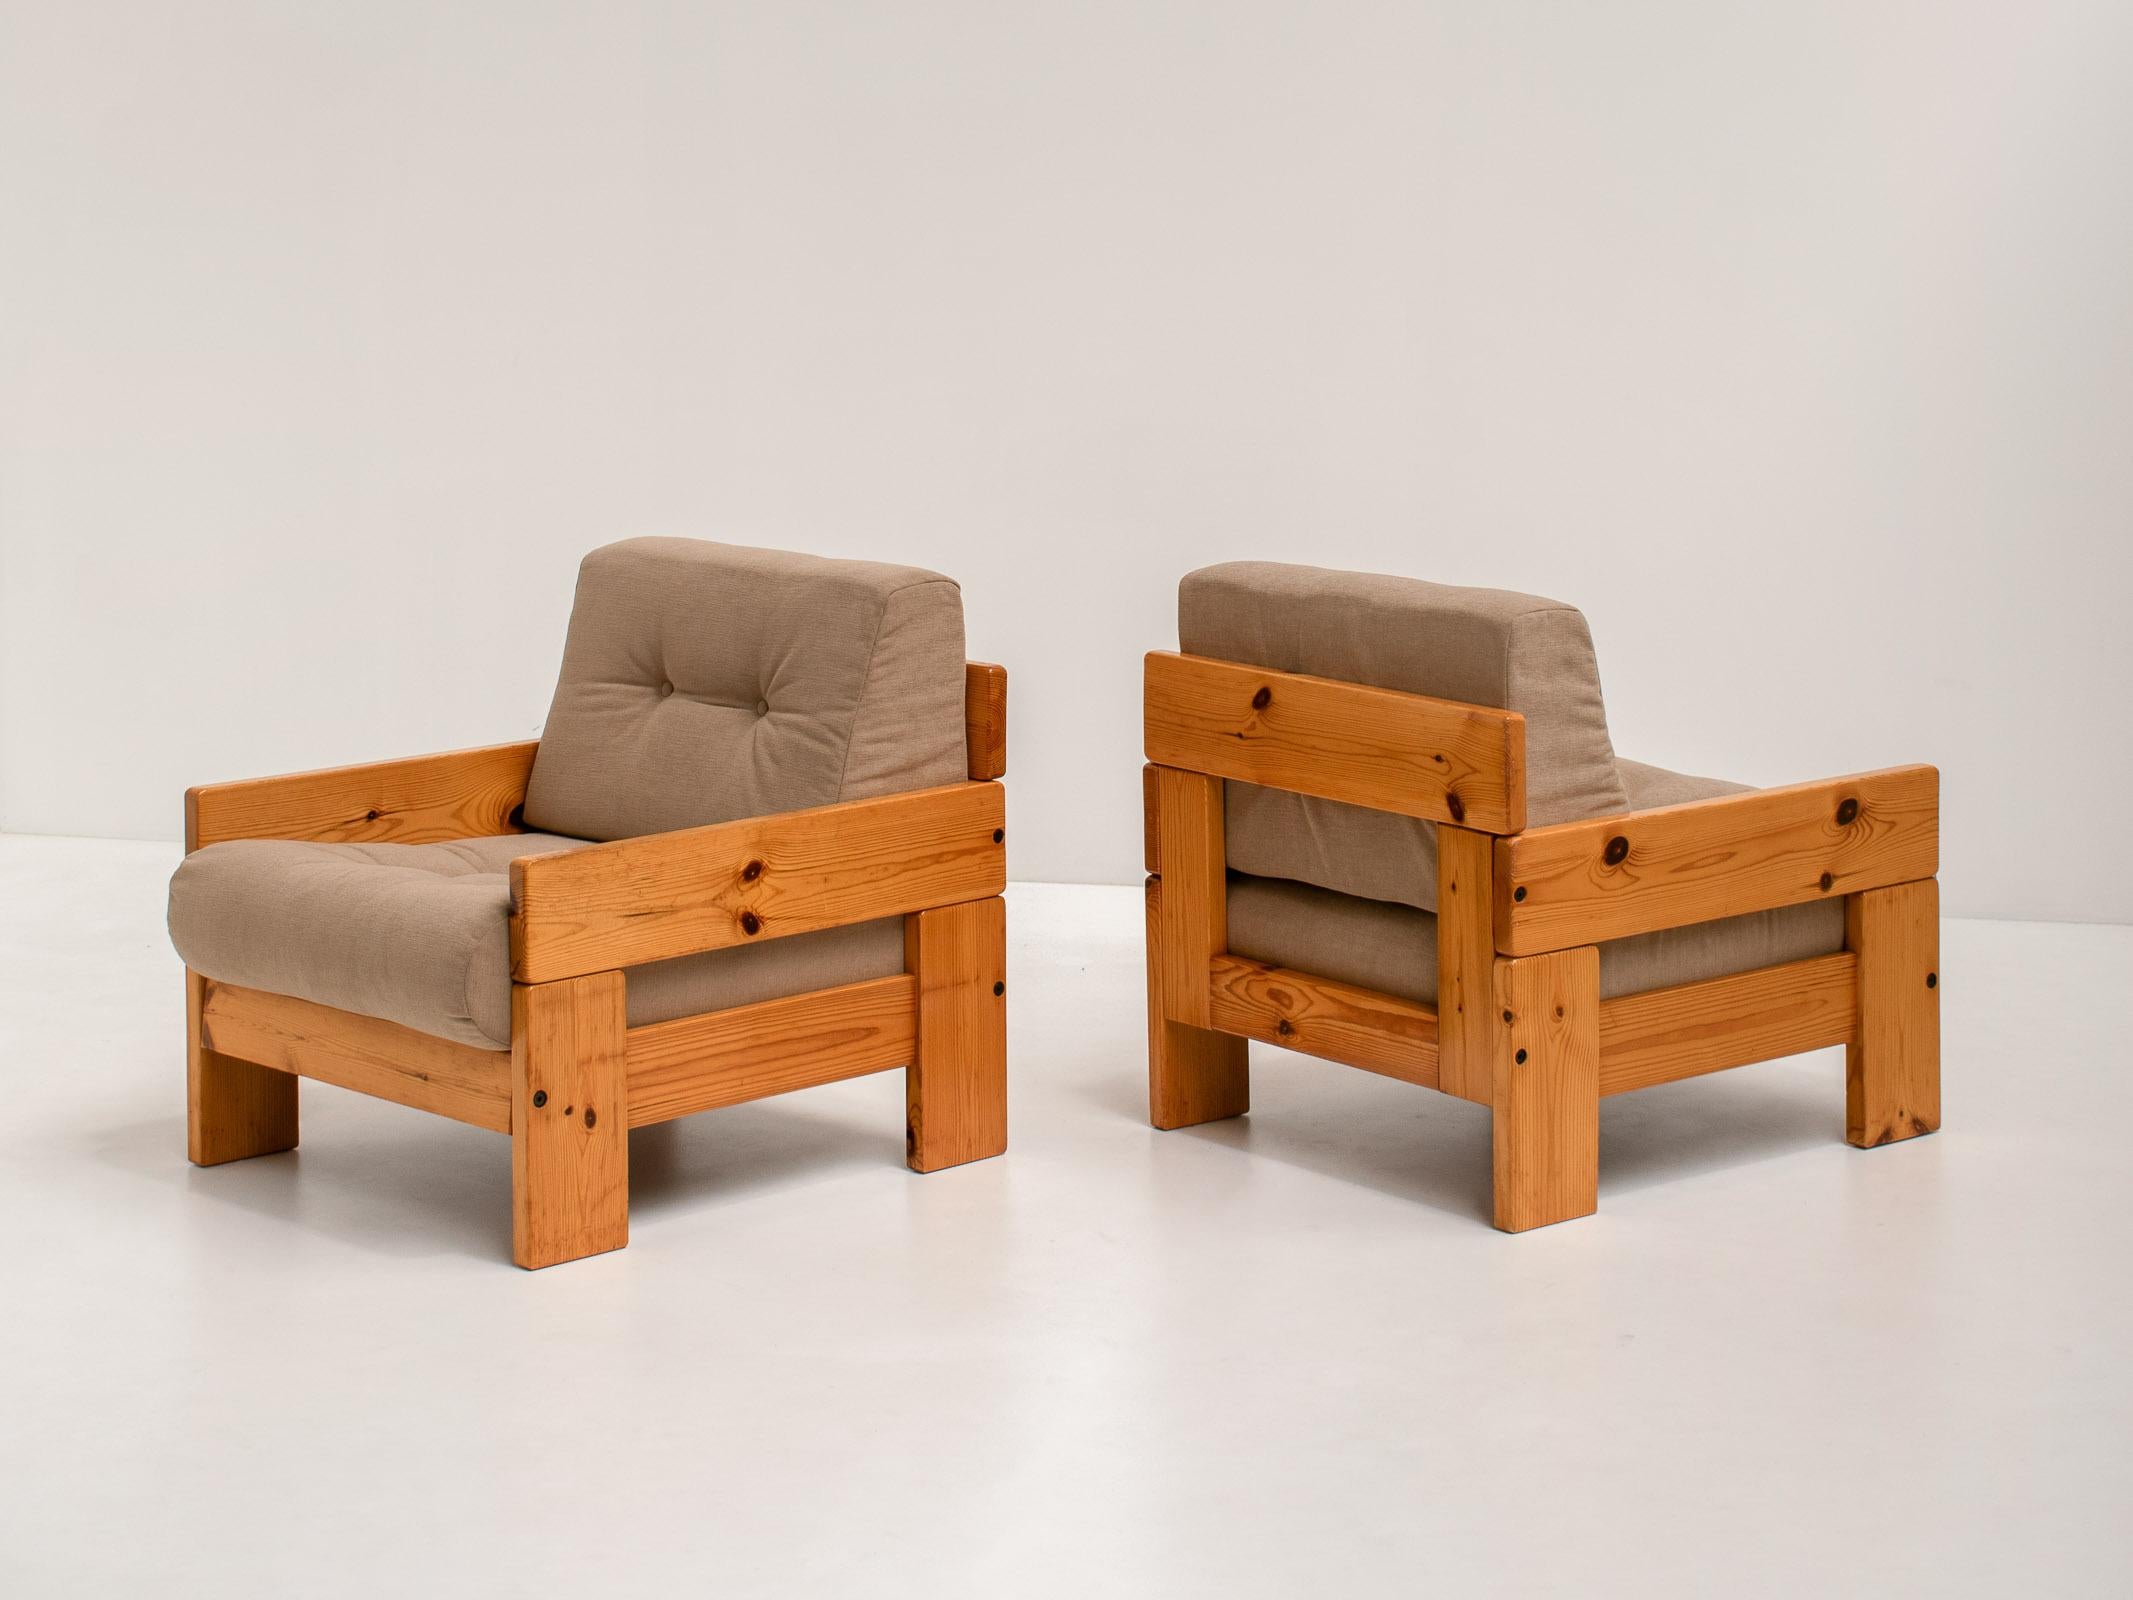 Pair of Minimalist Pine Lounge Chairs, Italy, 1970s For Sale 2